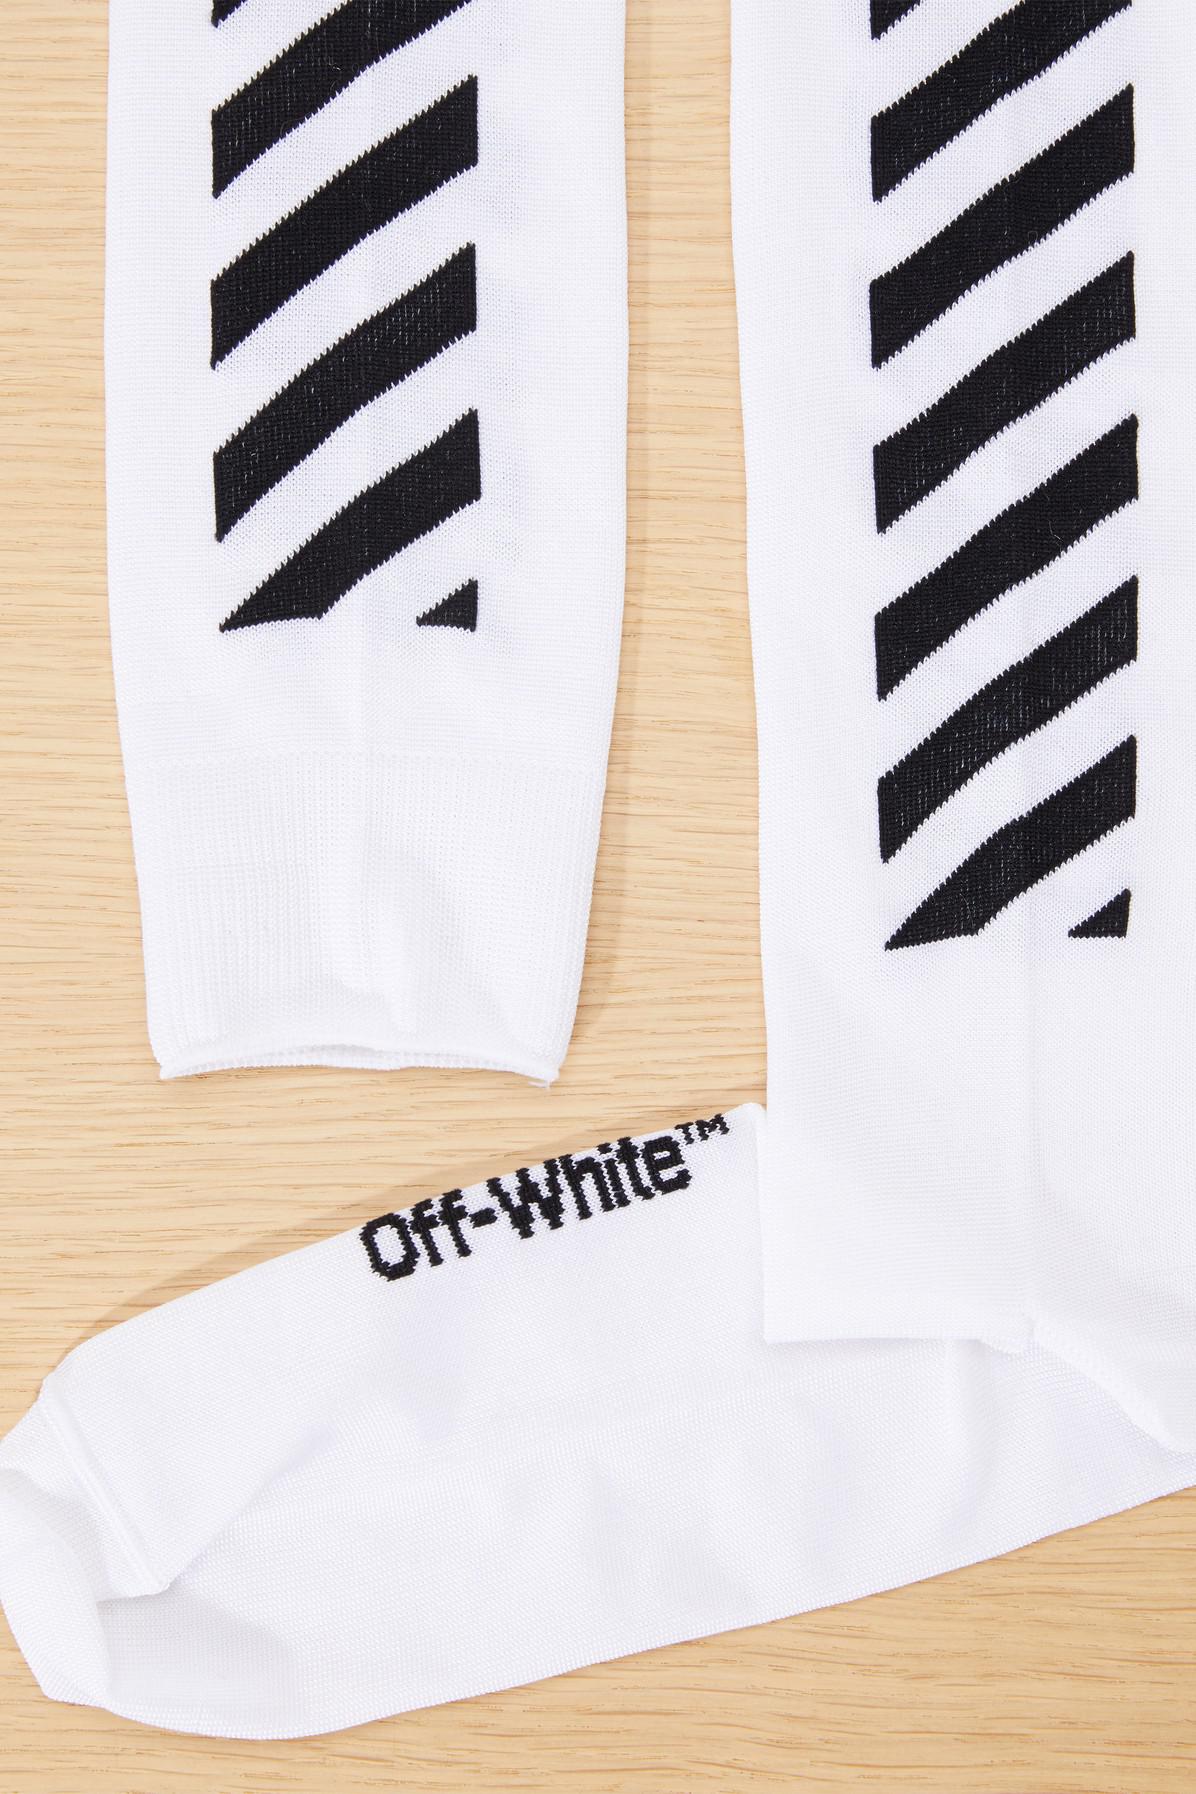 Off White Chaussette Flash Sales, 51% OFF | www.kayakerguide.com